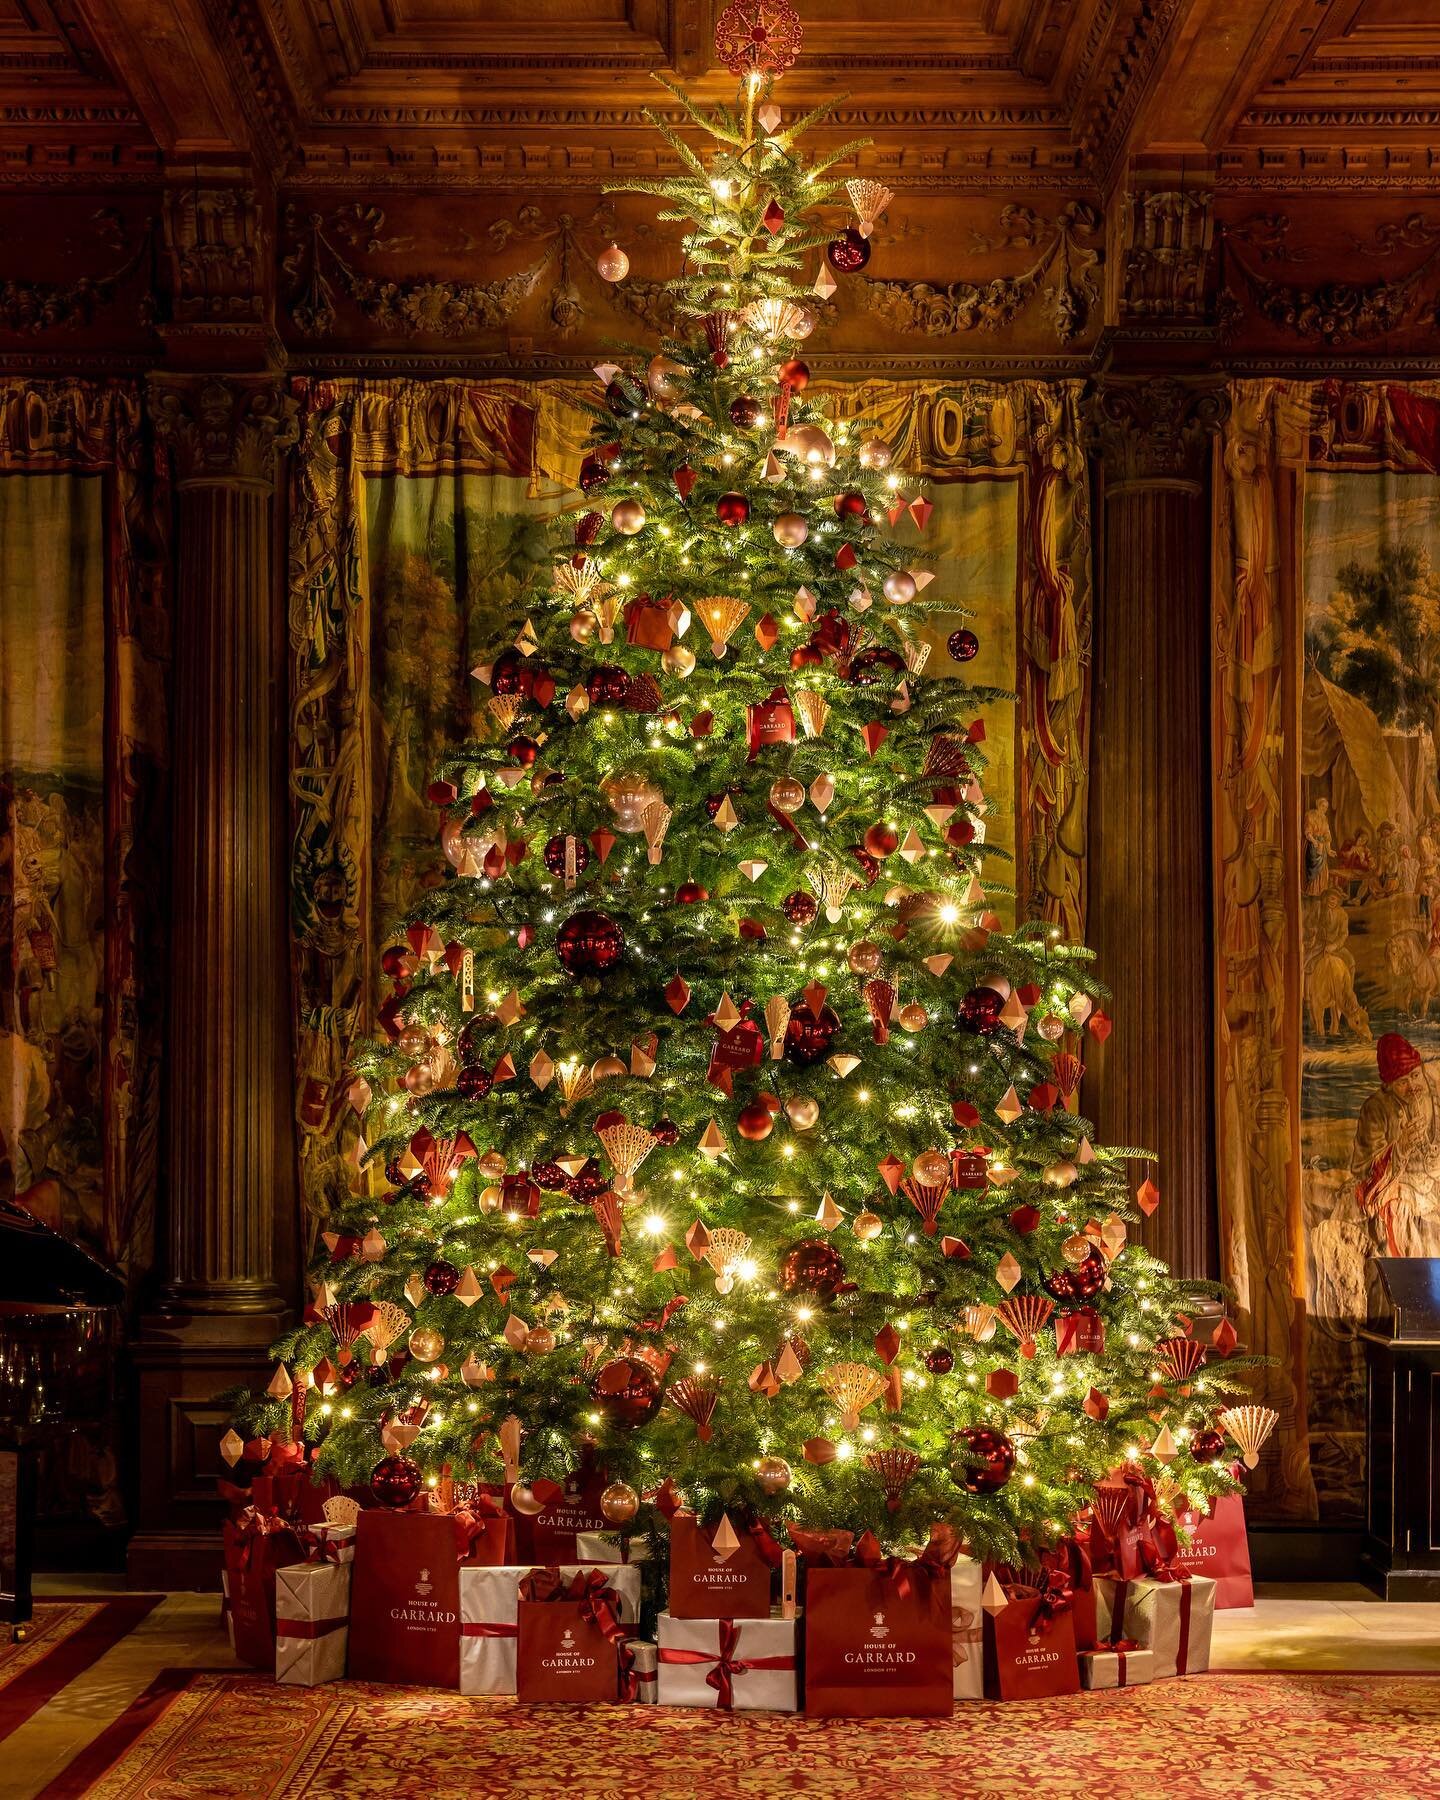 We were delighted to work with House of Garrard on the design of the Cliveden House Christmas tree 2020. The statuesque 17ft tree takes pride of place in the Great Hall and is one of the largest indoor Christmas trees in Europe. The decorations inclu